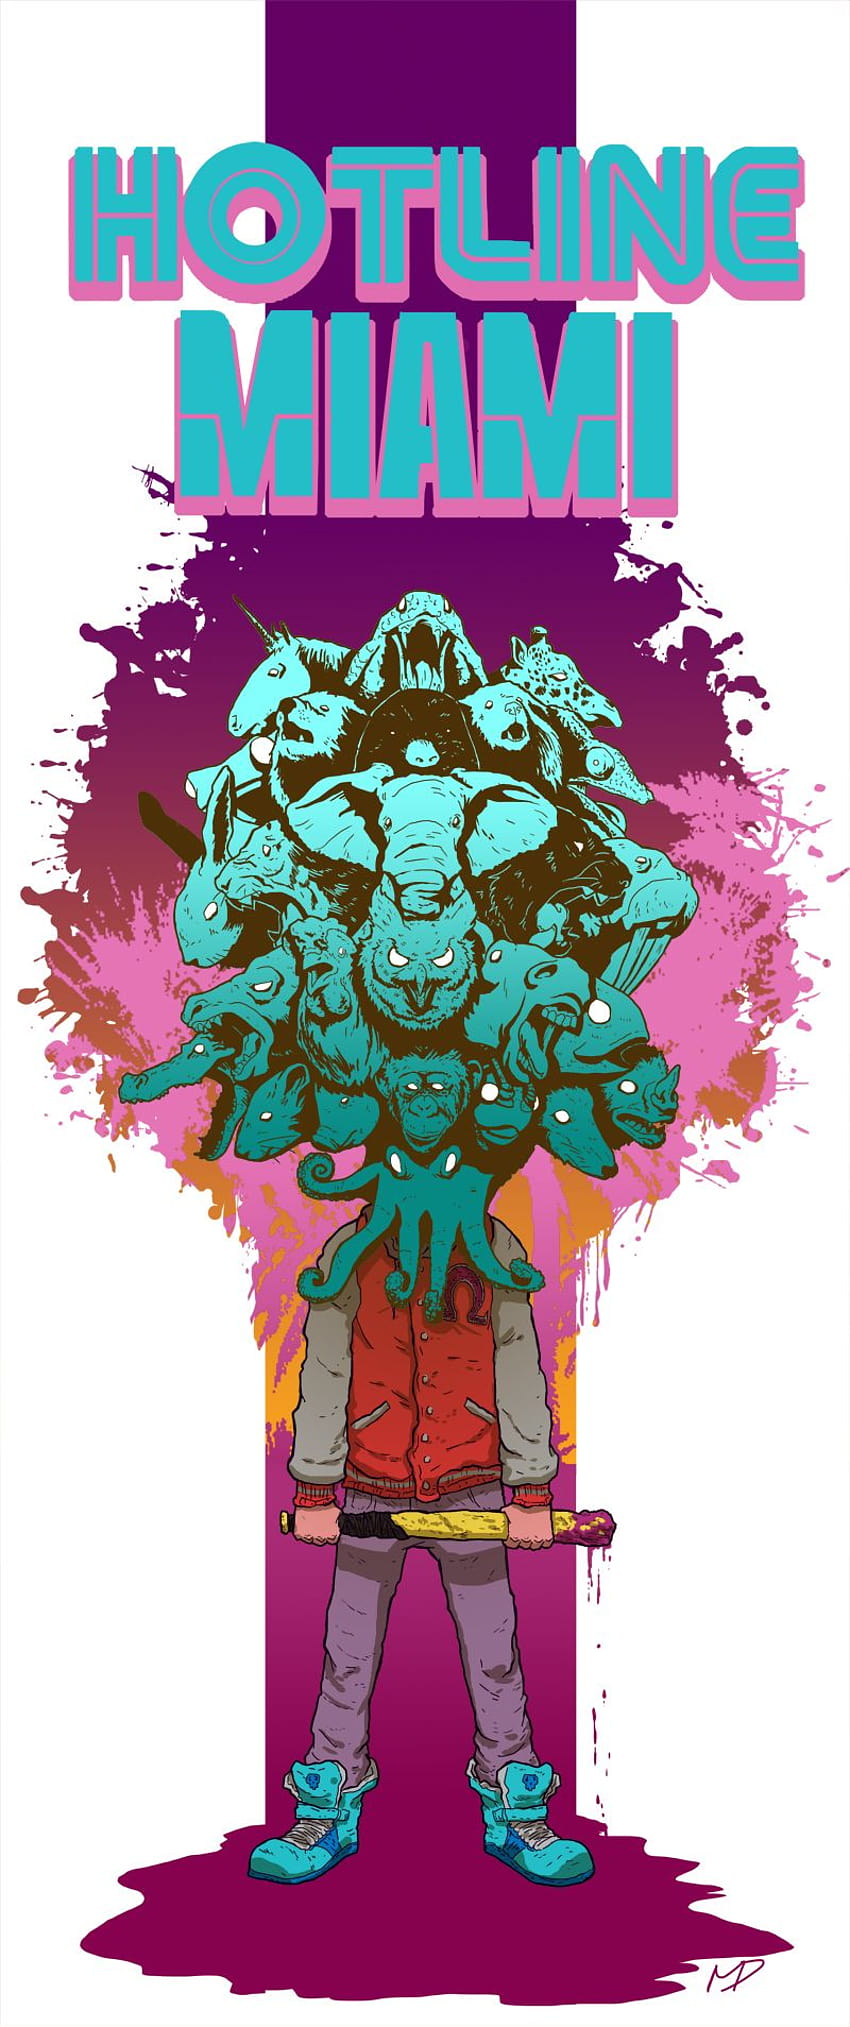 Wallpaper ID 732353  1080P Hotline Miami Hotline Miami 2 Wrong Number  free download